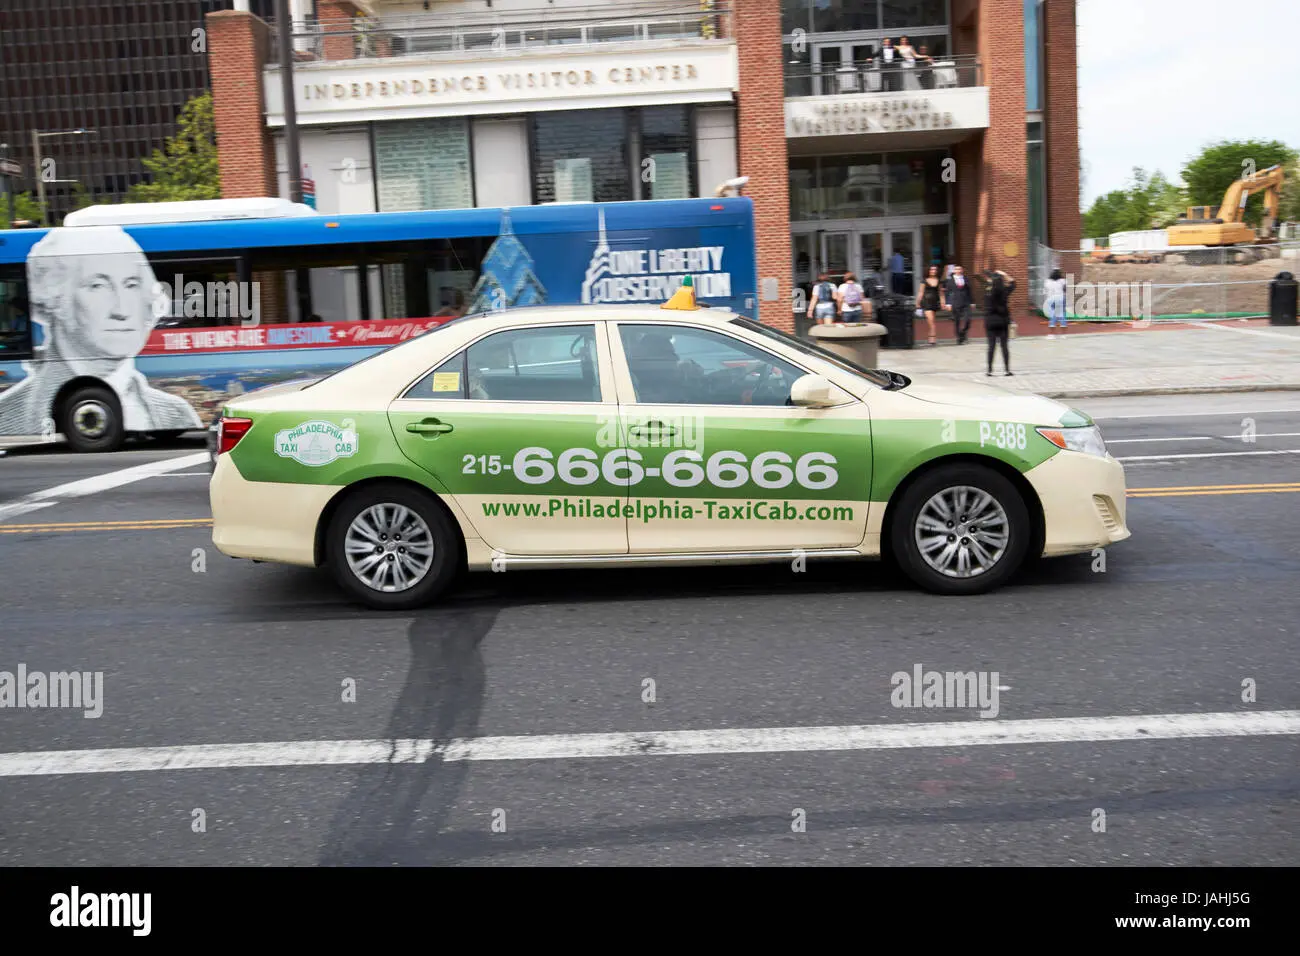 taxi cabs in philadelphia - Are there still taxis in Philadelphia